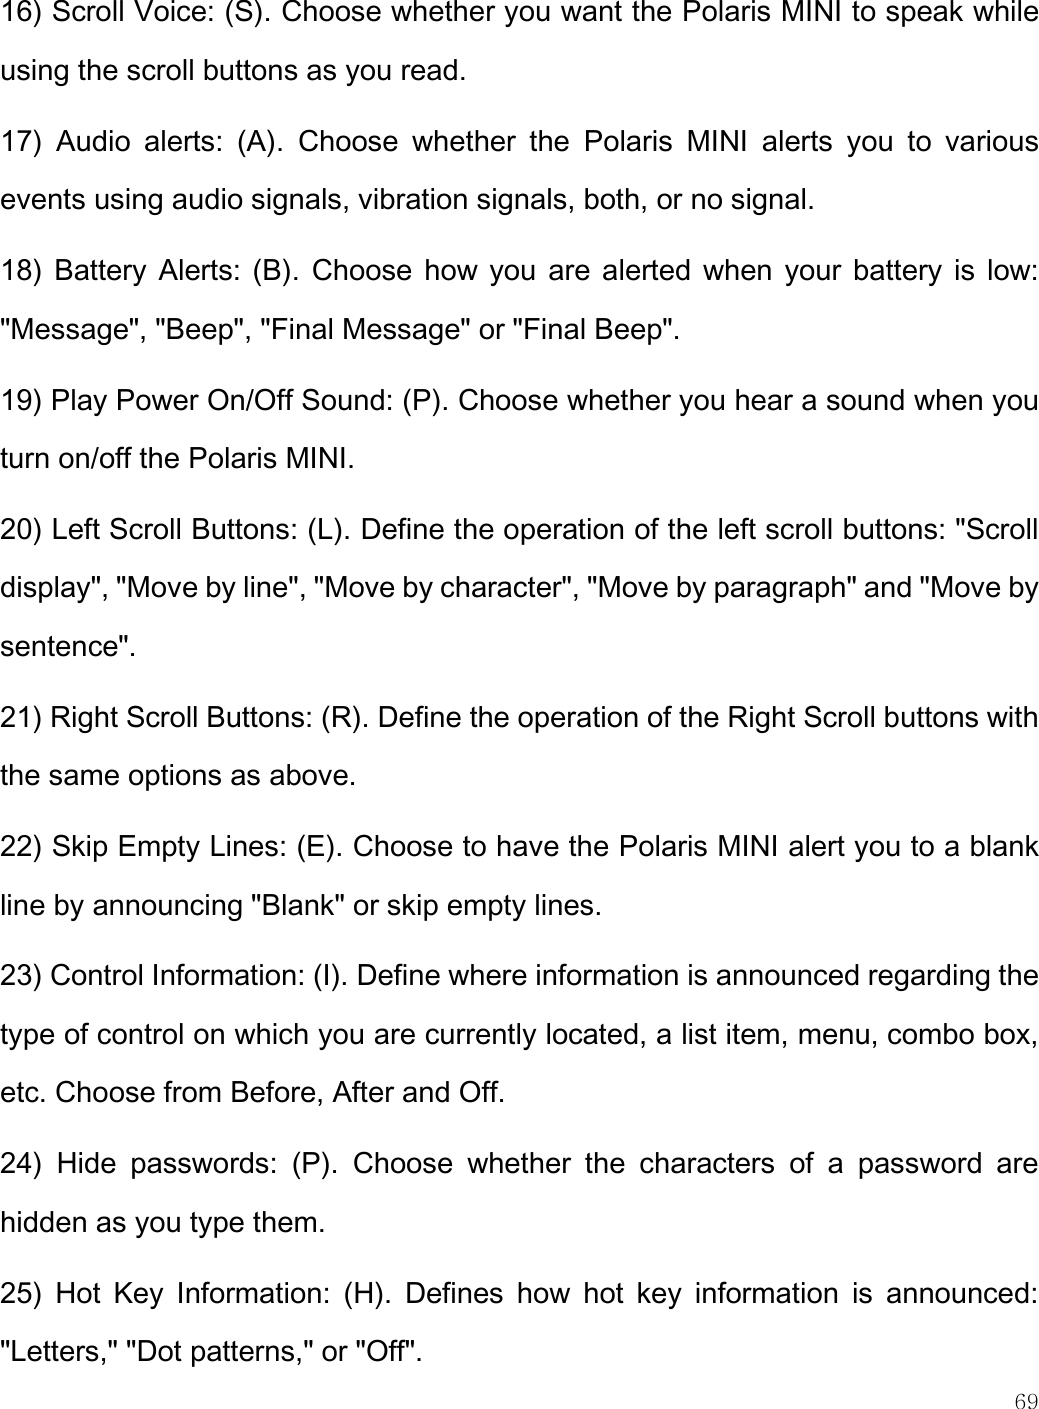    69  16) Scroll Voice: (S). Choose whether you want the Polaris MINI to speak while using the scroll buttons as you read.  17)  Audio  alerts:  (A).  Choose  whether  the  Polaris  MINI  alerts  you  to  various events using audio signals, vibration signals, both, or no signal. 18) Battery Alerts: (B). Choose how you are alerted when your battery is low: &quot;Message&quot;, &quot;Beep&quot;, &quot;Final Message&quot; or &quot;Final Beep&quot;.  19) Play Power On/Off Sound: (P). Choose whether you hear a sound when you turn on/off the Polaris MINI.  20) Left Scroll Buttons: (L). Define the operation of the left scroll buttons: &quot;Scroll display&quot;, &quot;Move by line&quot;, &quot;Move by character&quot;, &quot;Move by paragraph&quot; and &quot;Move by sentence&quot;.   21) Right Scroll Buttons: (R). Define the operation of the Right Scroll buttons with the same options as above. 22) Skip Empty Lines: (E). Choose to have the Polaris MINI alert you to a blank line by announcing &quot;Blank&quot; or skip empty lines.  23) Control Information: (I). Define where information is announced regarding the type of control on which you are currently located, a list item, menu, combo box, etc. Choose from Before, After and Off.  24)  Hide  passwords:  (P).  Choose  whether  the  characters  of  a  password  are hidden as you type them.  25)  Hot  Key  Information:  (H).  Defines  how  hot  key  information  is  announced: &quot;Letters,&quot; &quot;Dot patterns,&quot; or &quot;Off&quot;.  